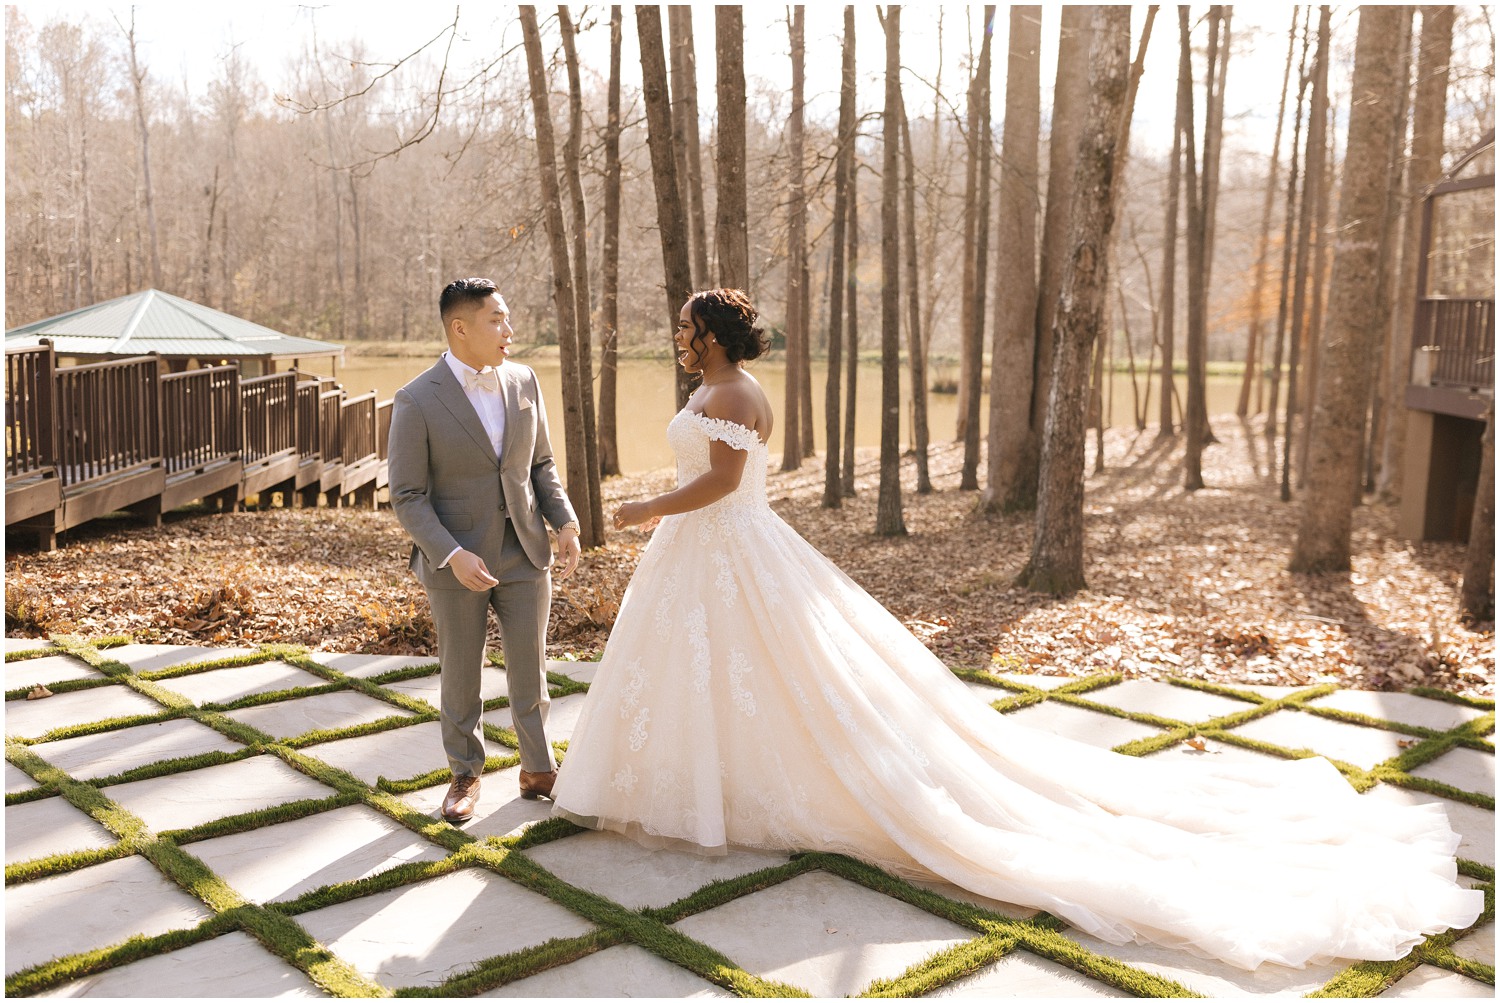 First look between bride and groom at The Barn at Valhalla in Raleigh, NC